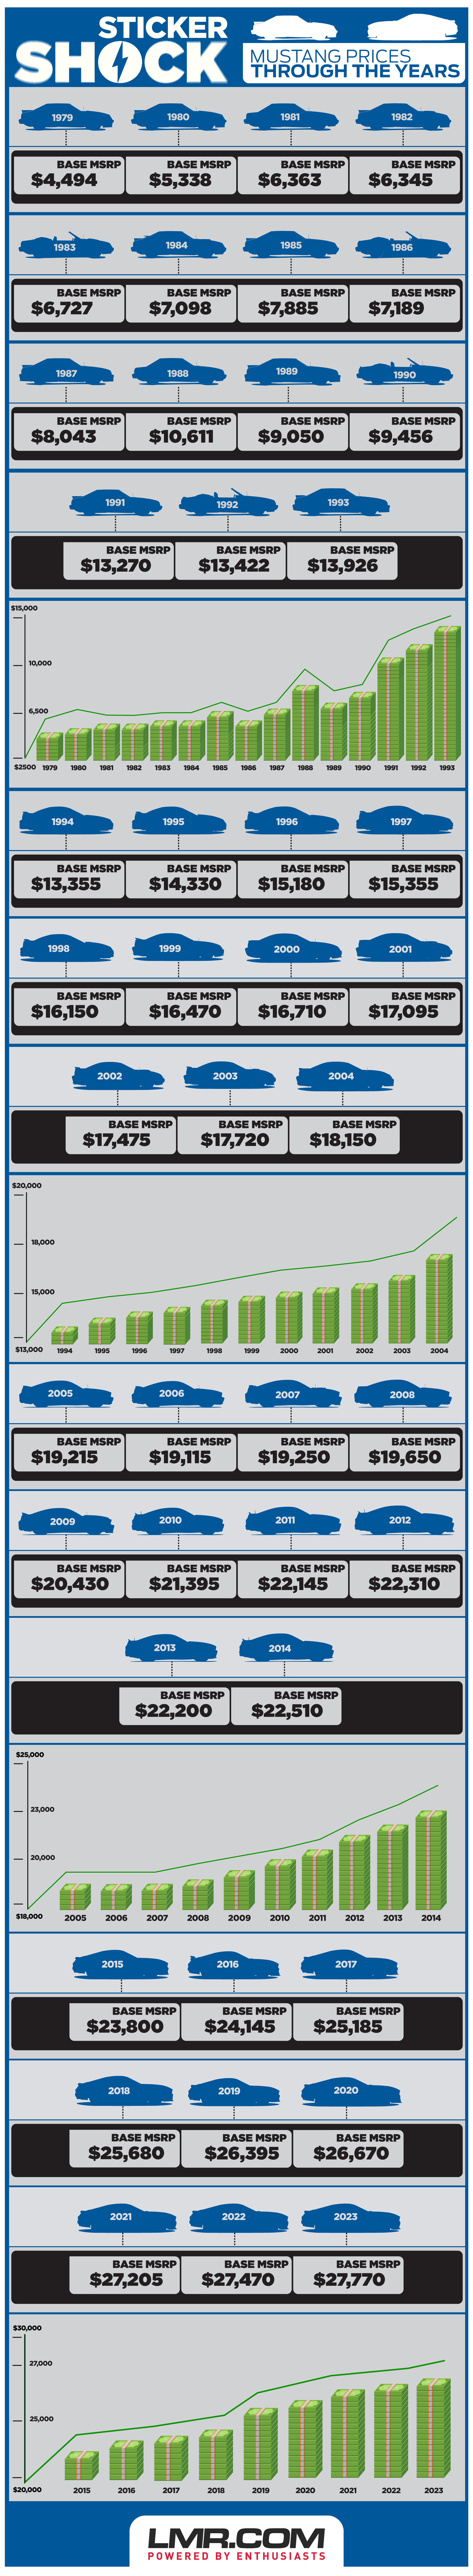 Ford Mustang Prices By The Year - Ford Mustang Prices By The Year